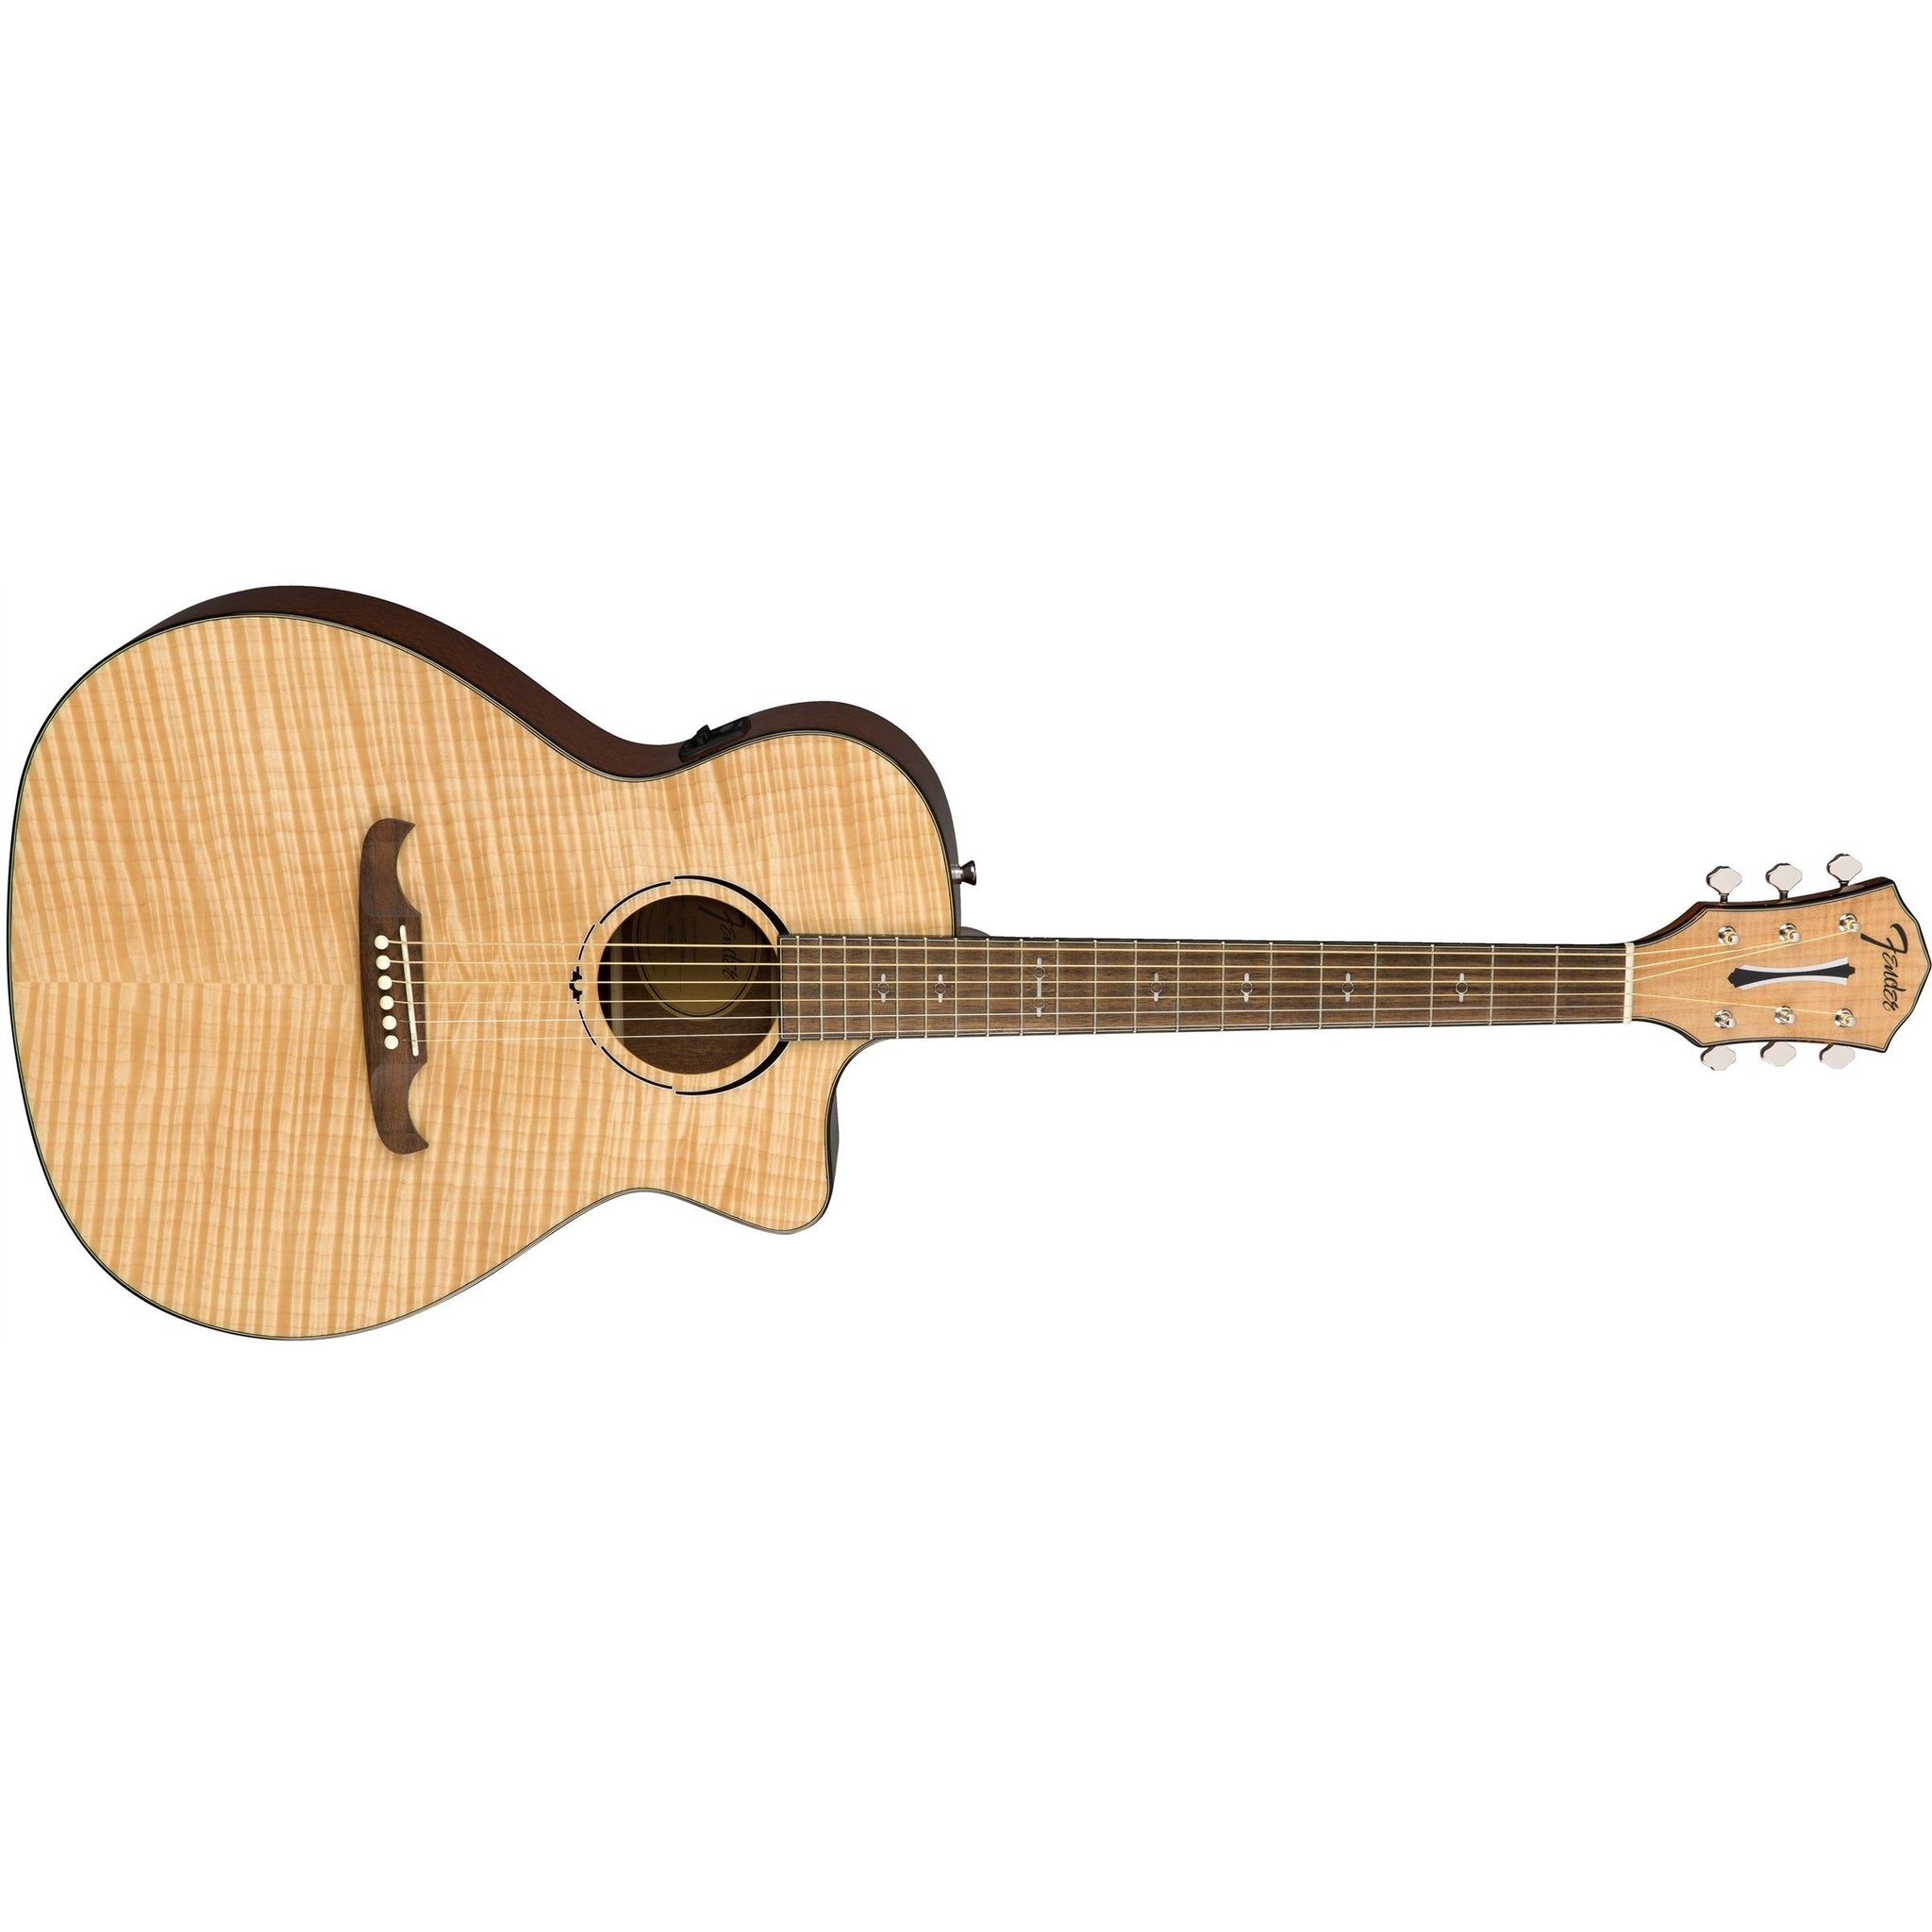 Fender FA-345CE Auditorium Acoustic/Electric Guitar-Natural-Music World Academy